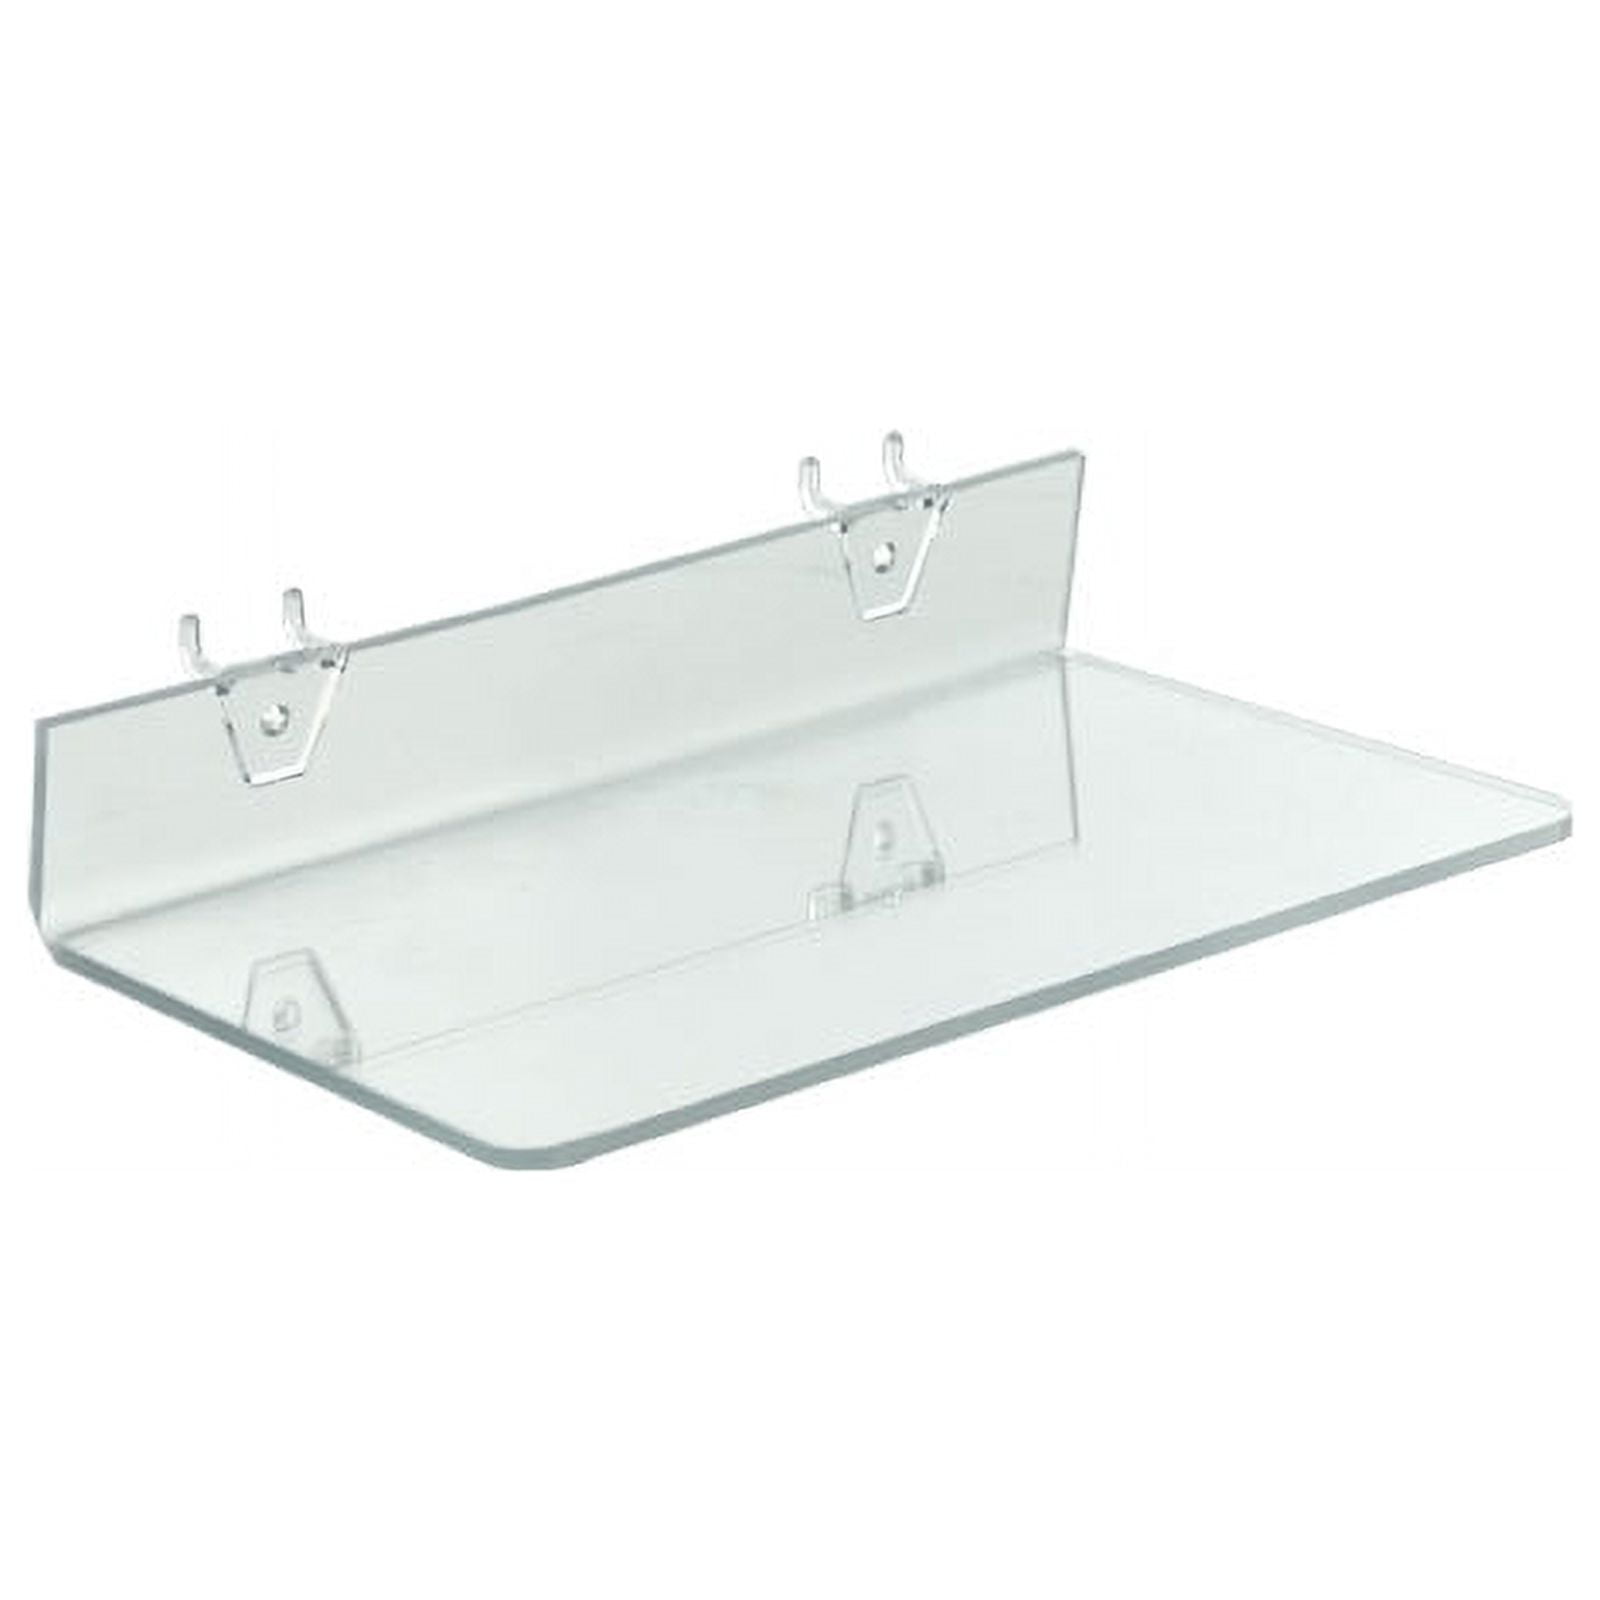 Clear Acrylic 4-Way Divider Shield for Table Overall Size: 63.5 Wide x 23.5 High Azar Displays